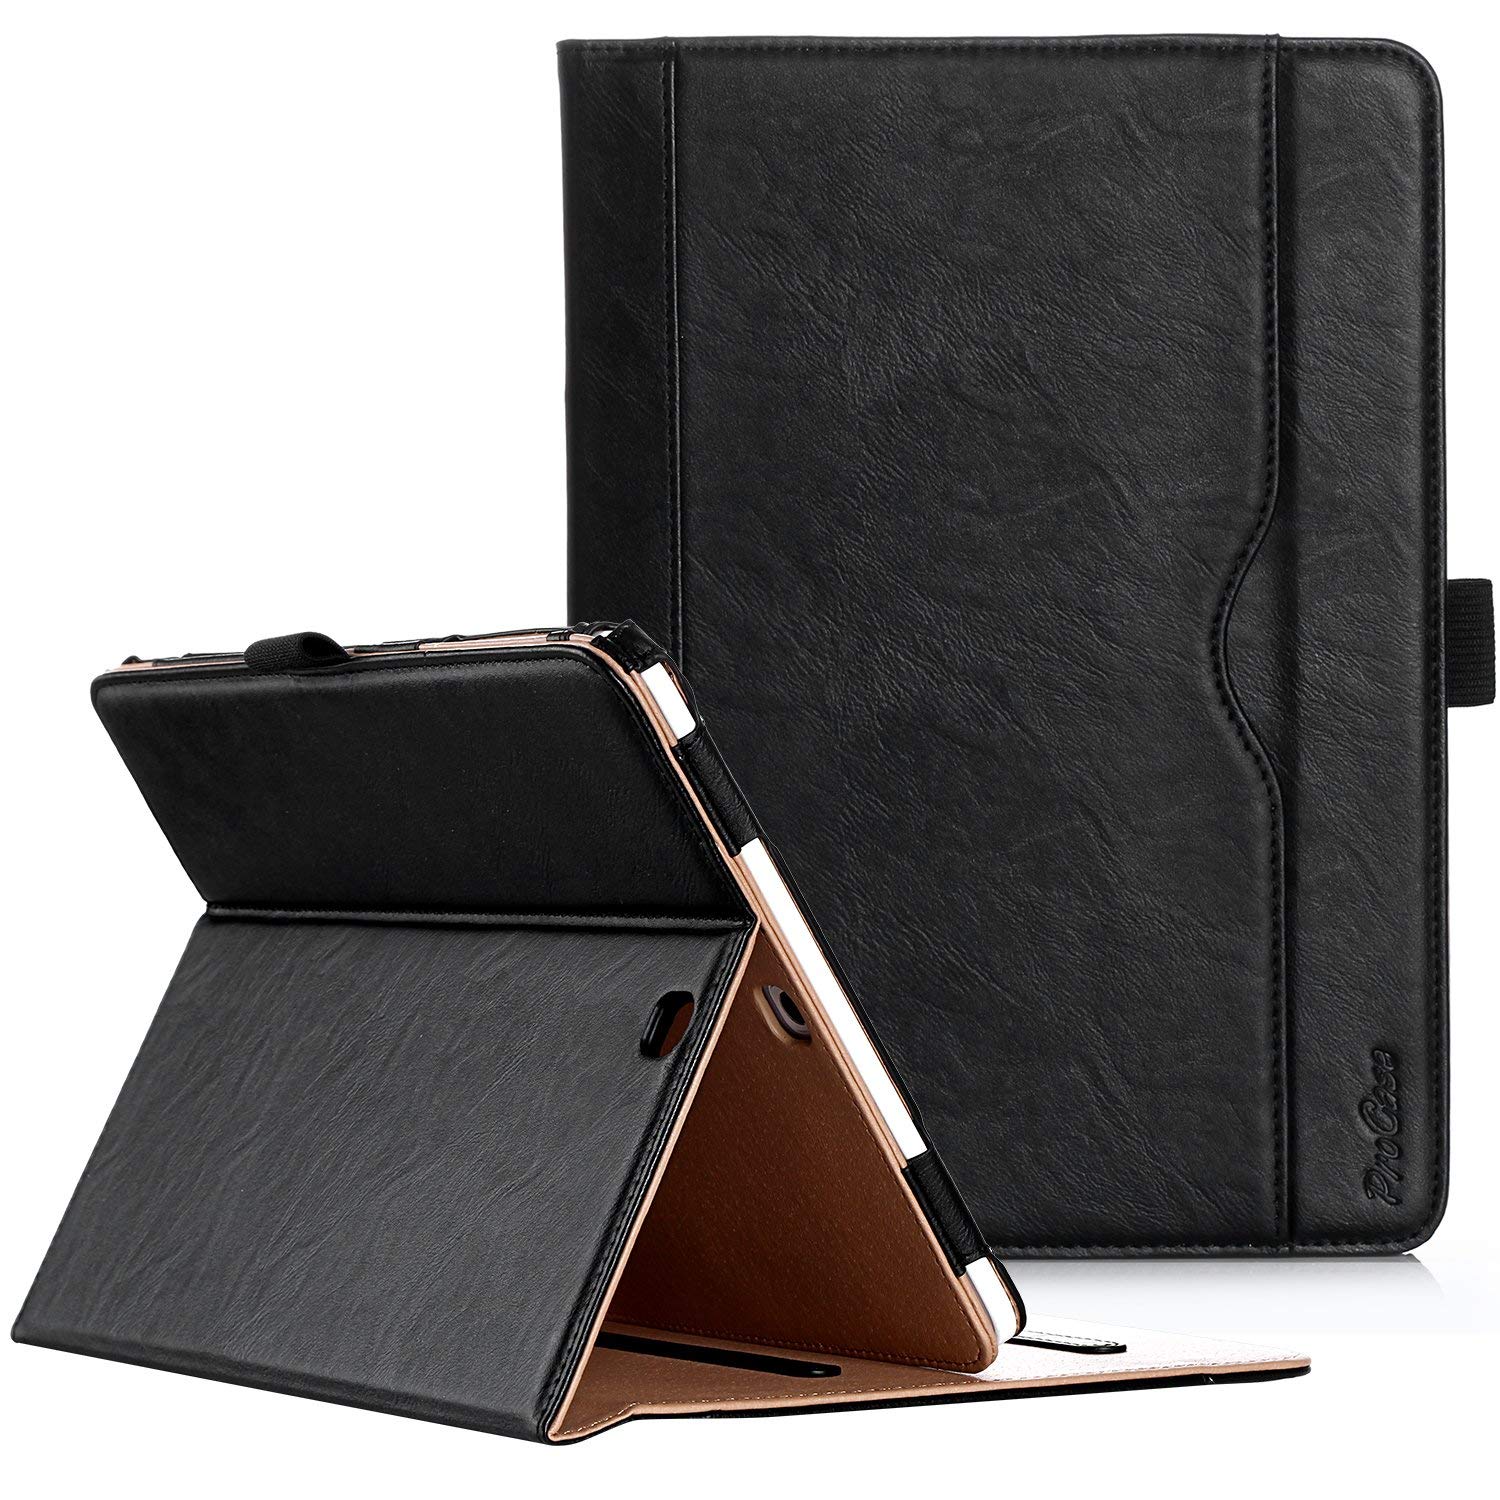 ProCase Samsung Galaxy Tab S2 9.7 Inch Case Cover for Galaxy Tab S2 Tablet 9.7 inch, SM-T810 T815 T813 -Black.